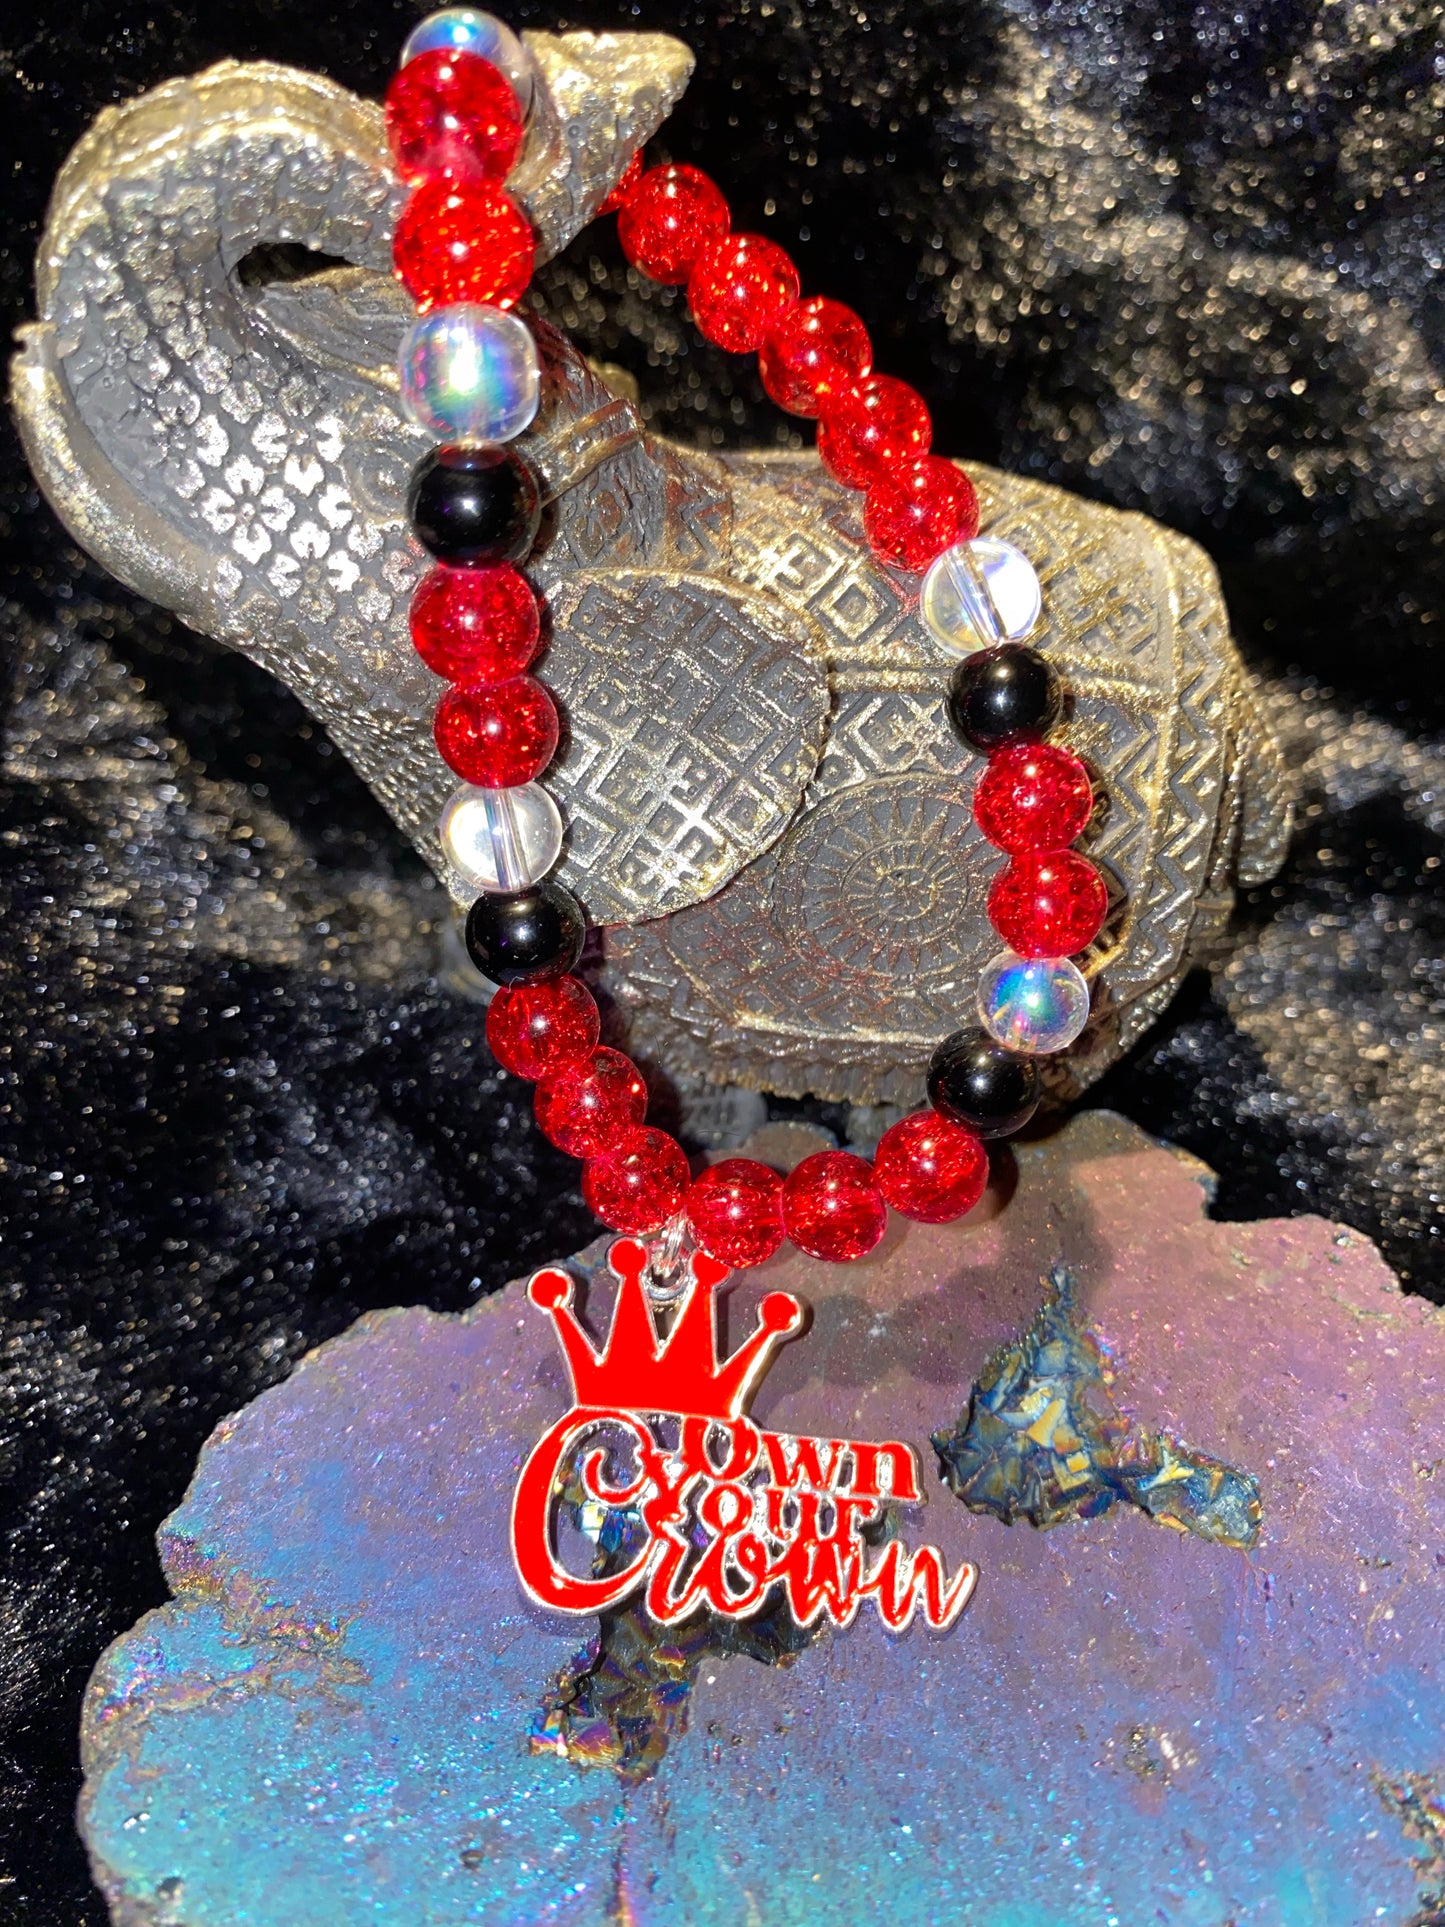 Own Your Crown Charm Bracelet